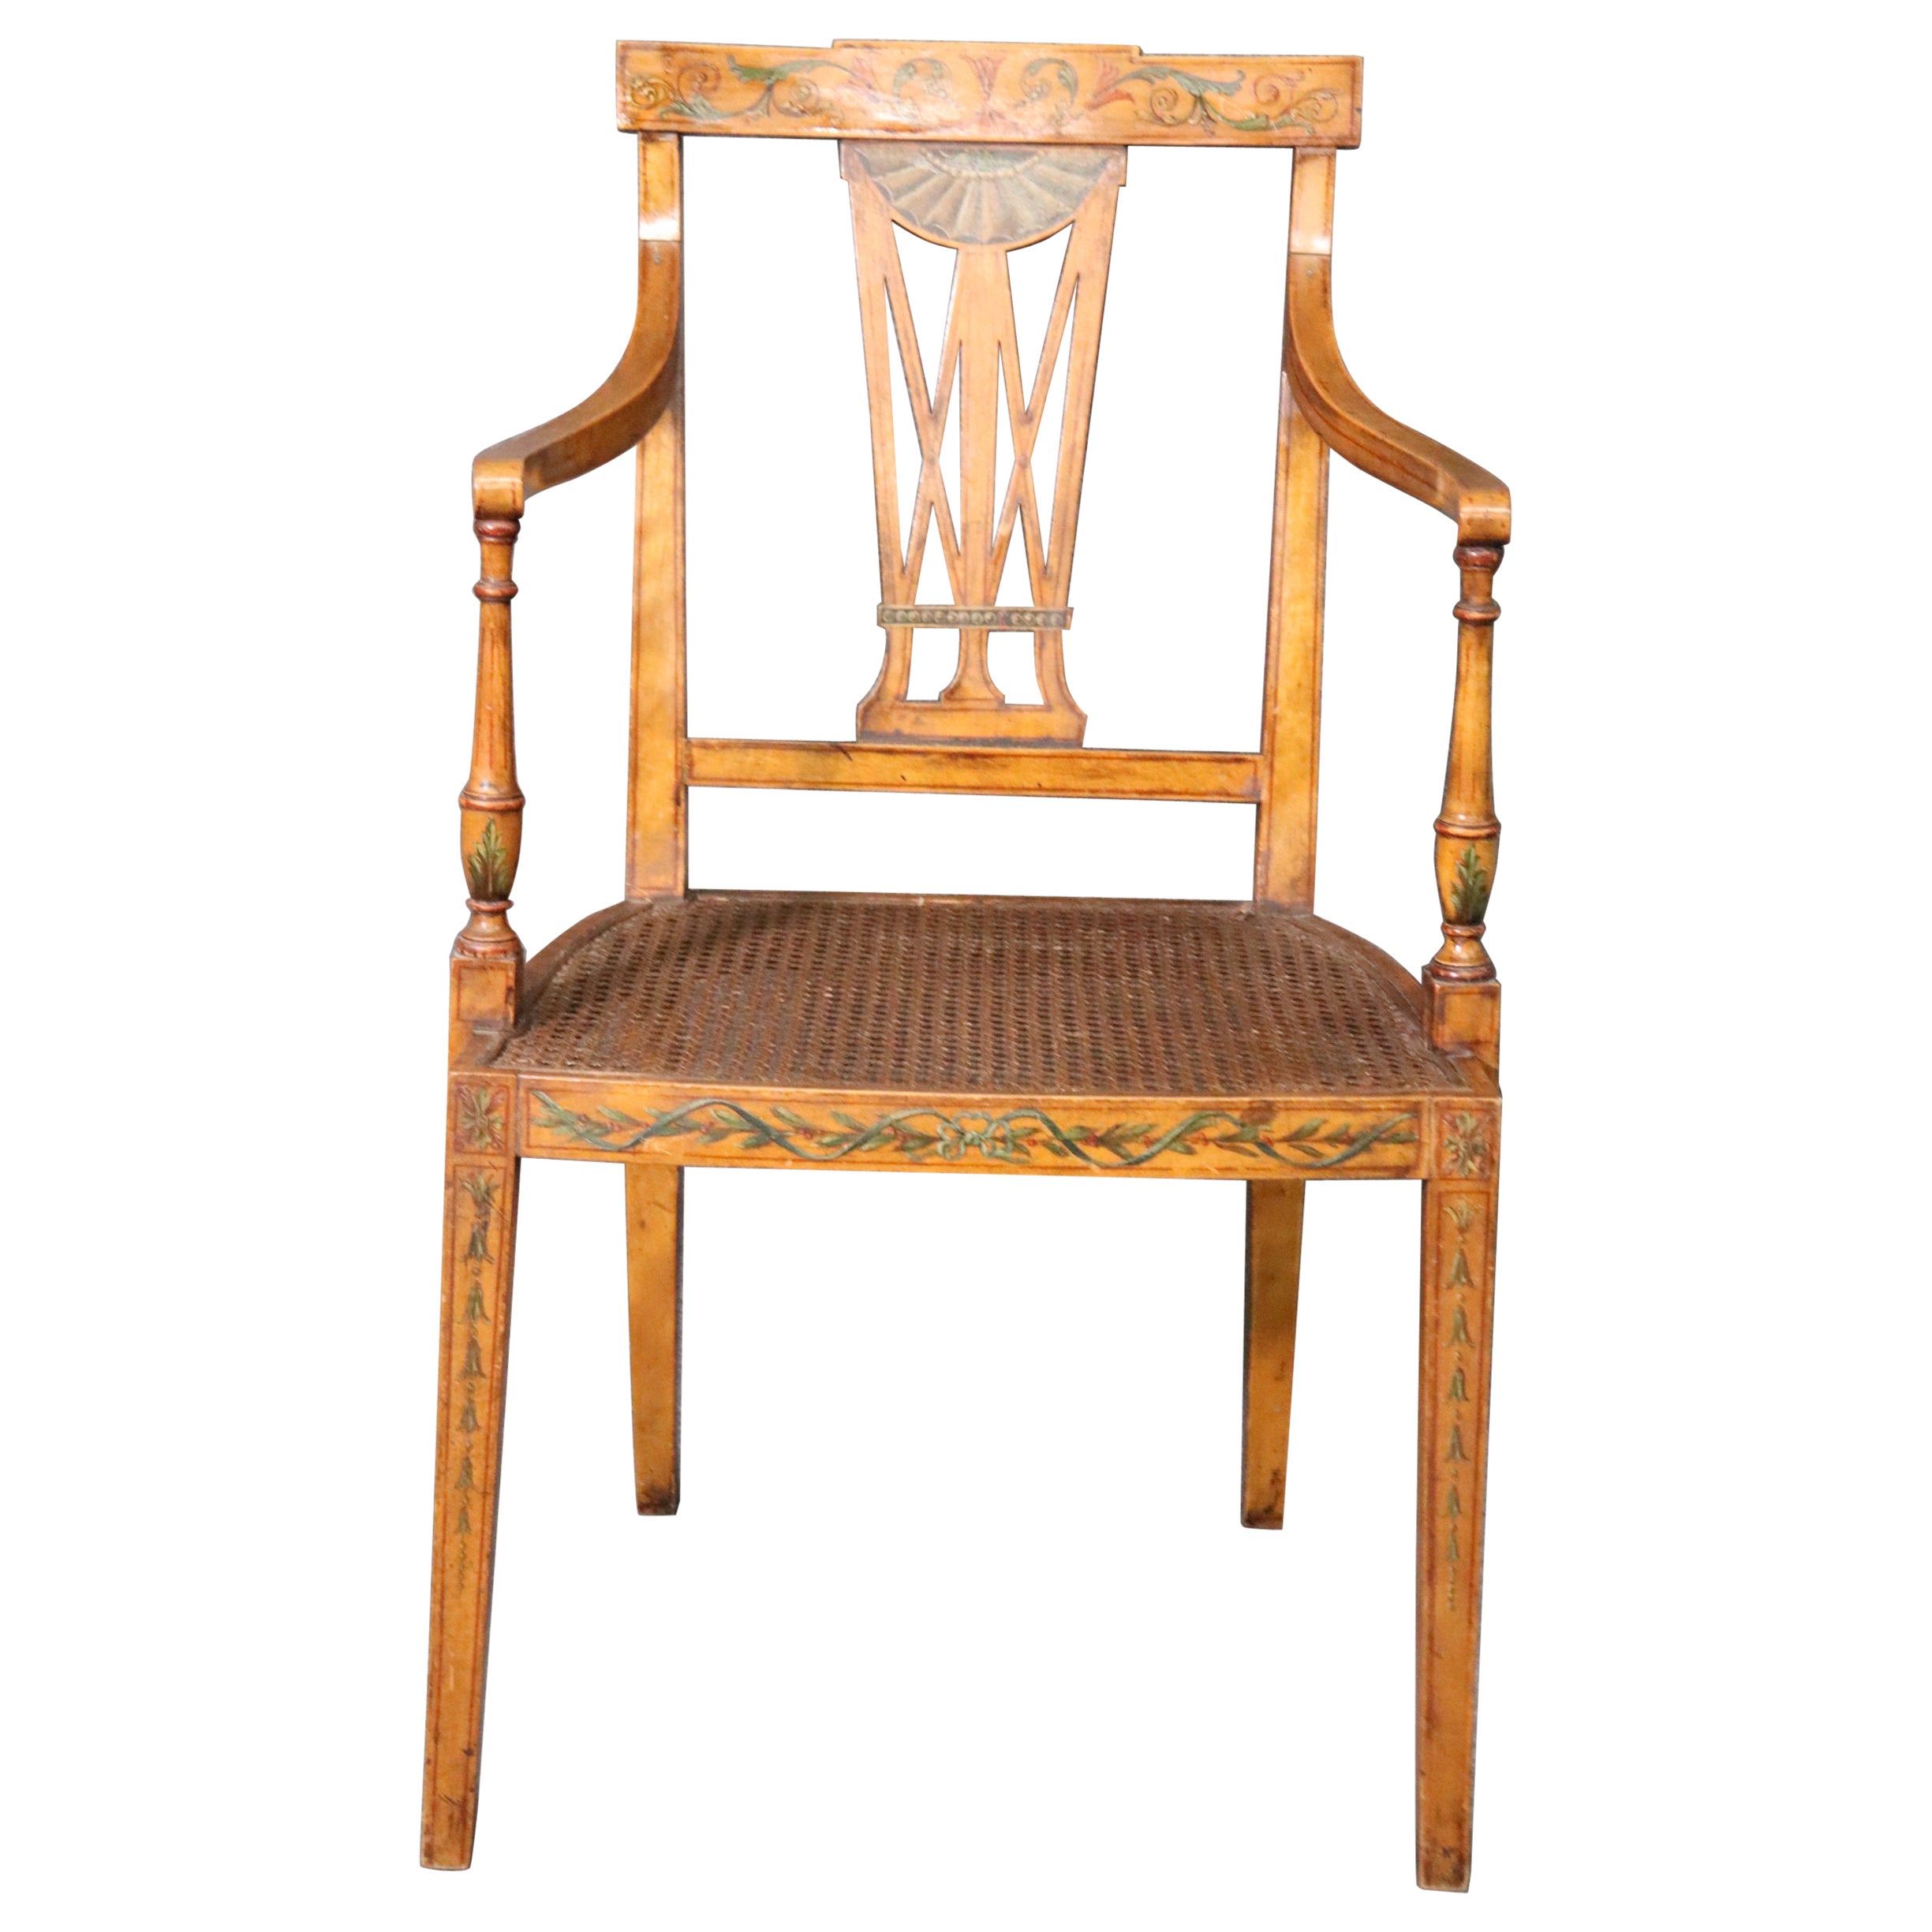 Fine Quality Paint Decorated English Satinwood Adams Cane Armchair Circa 1920 For Sale